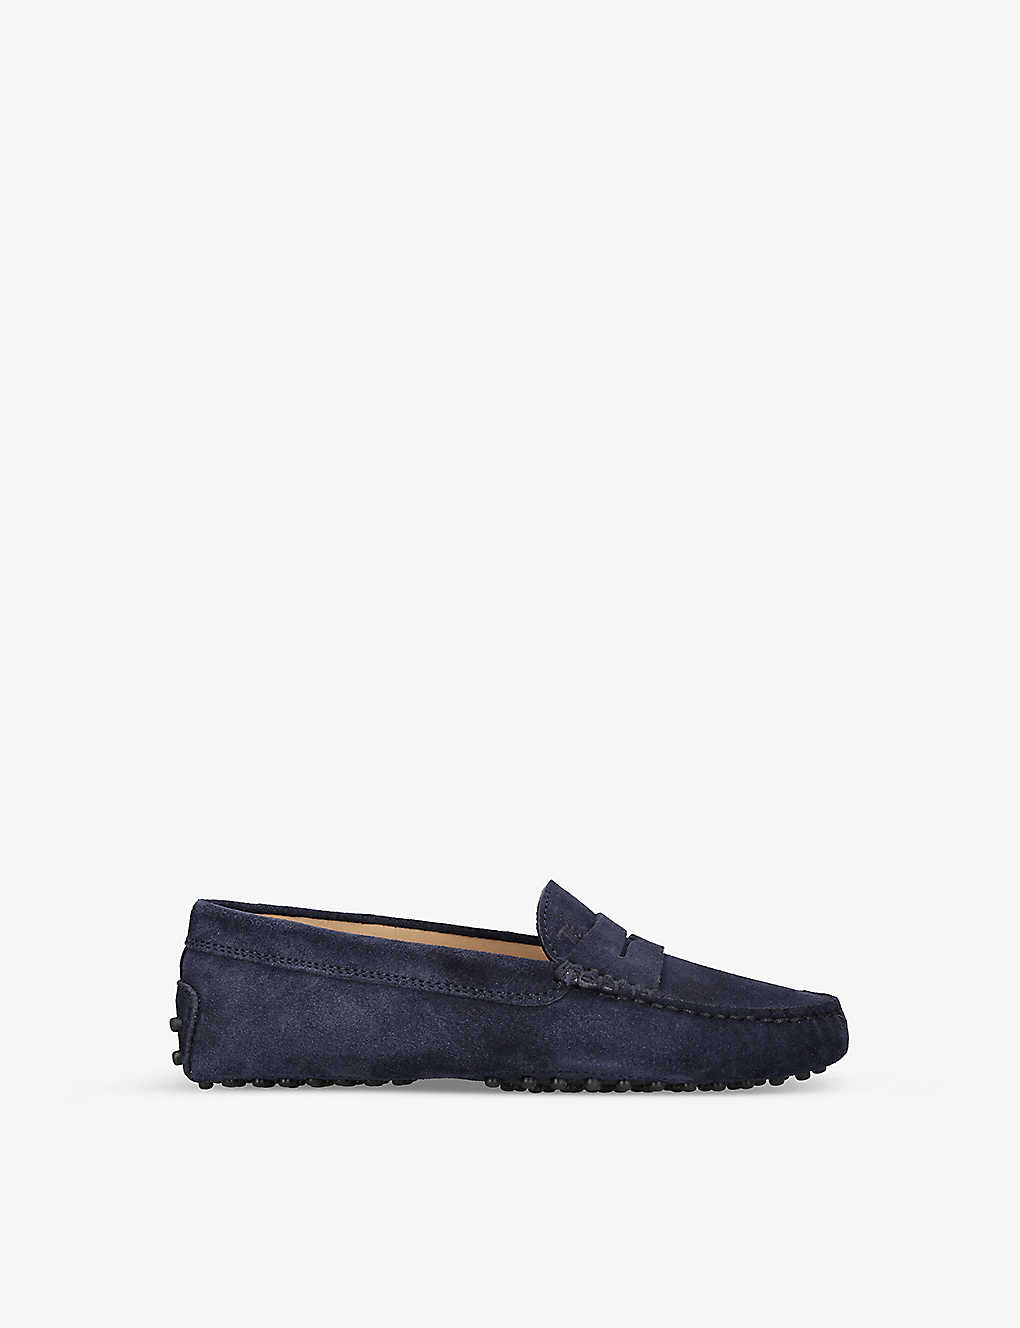 Tod's Tods Boys Navy Kids Mocassino Gommini Suede Driving Shoes 6-8 Years